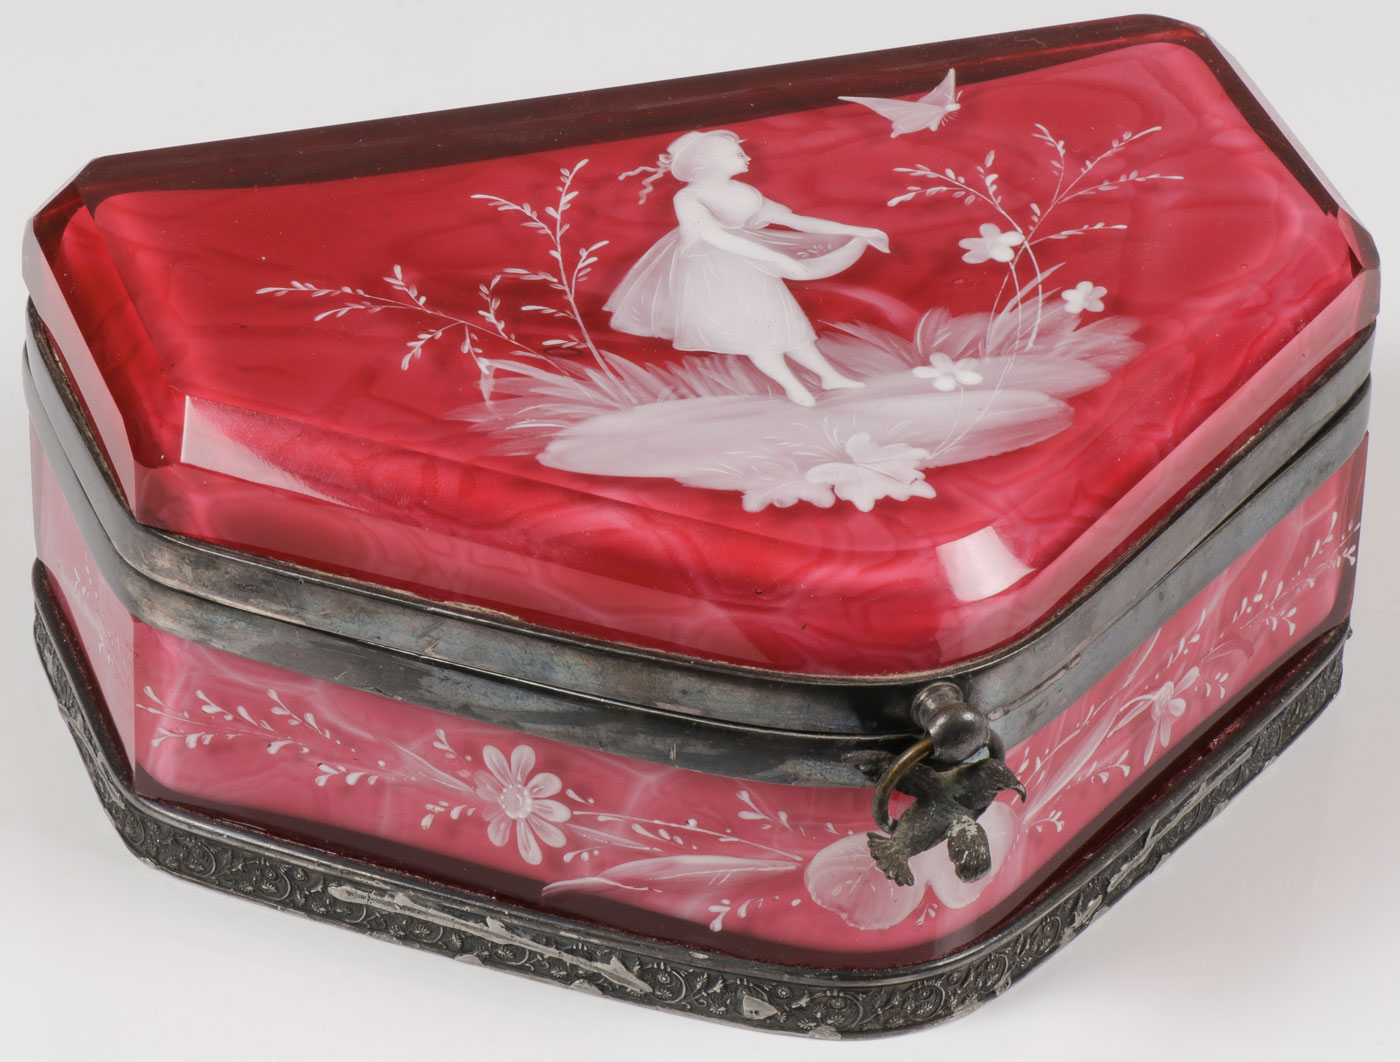 A CASED GLASS ENAMELED BOX, CIRCA 1885 - Image 2 of 3